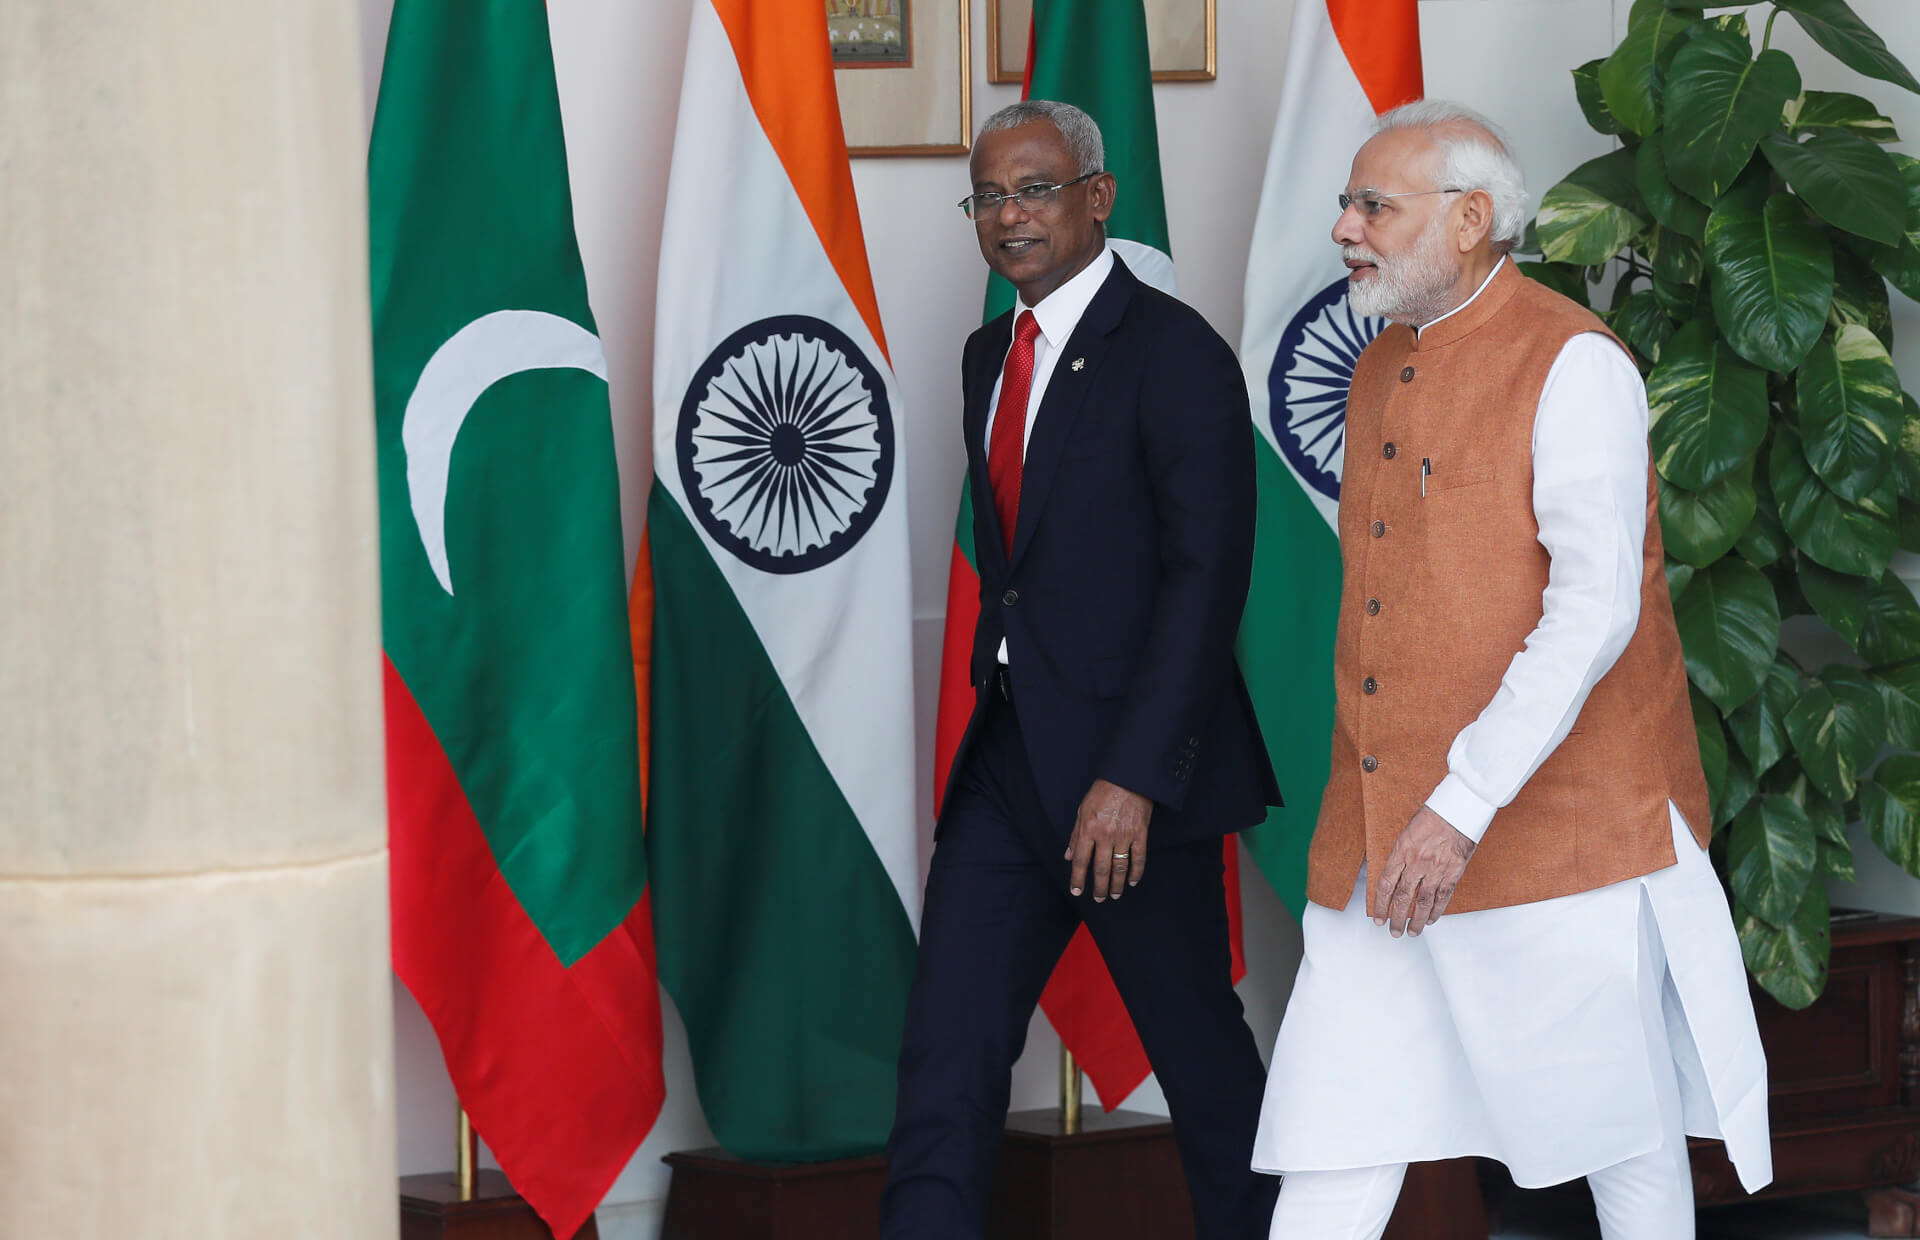 What’s Driving the “India-Out” Campaign in the Maldives?